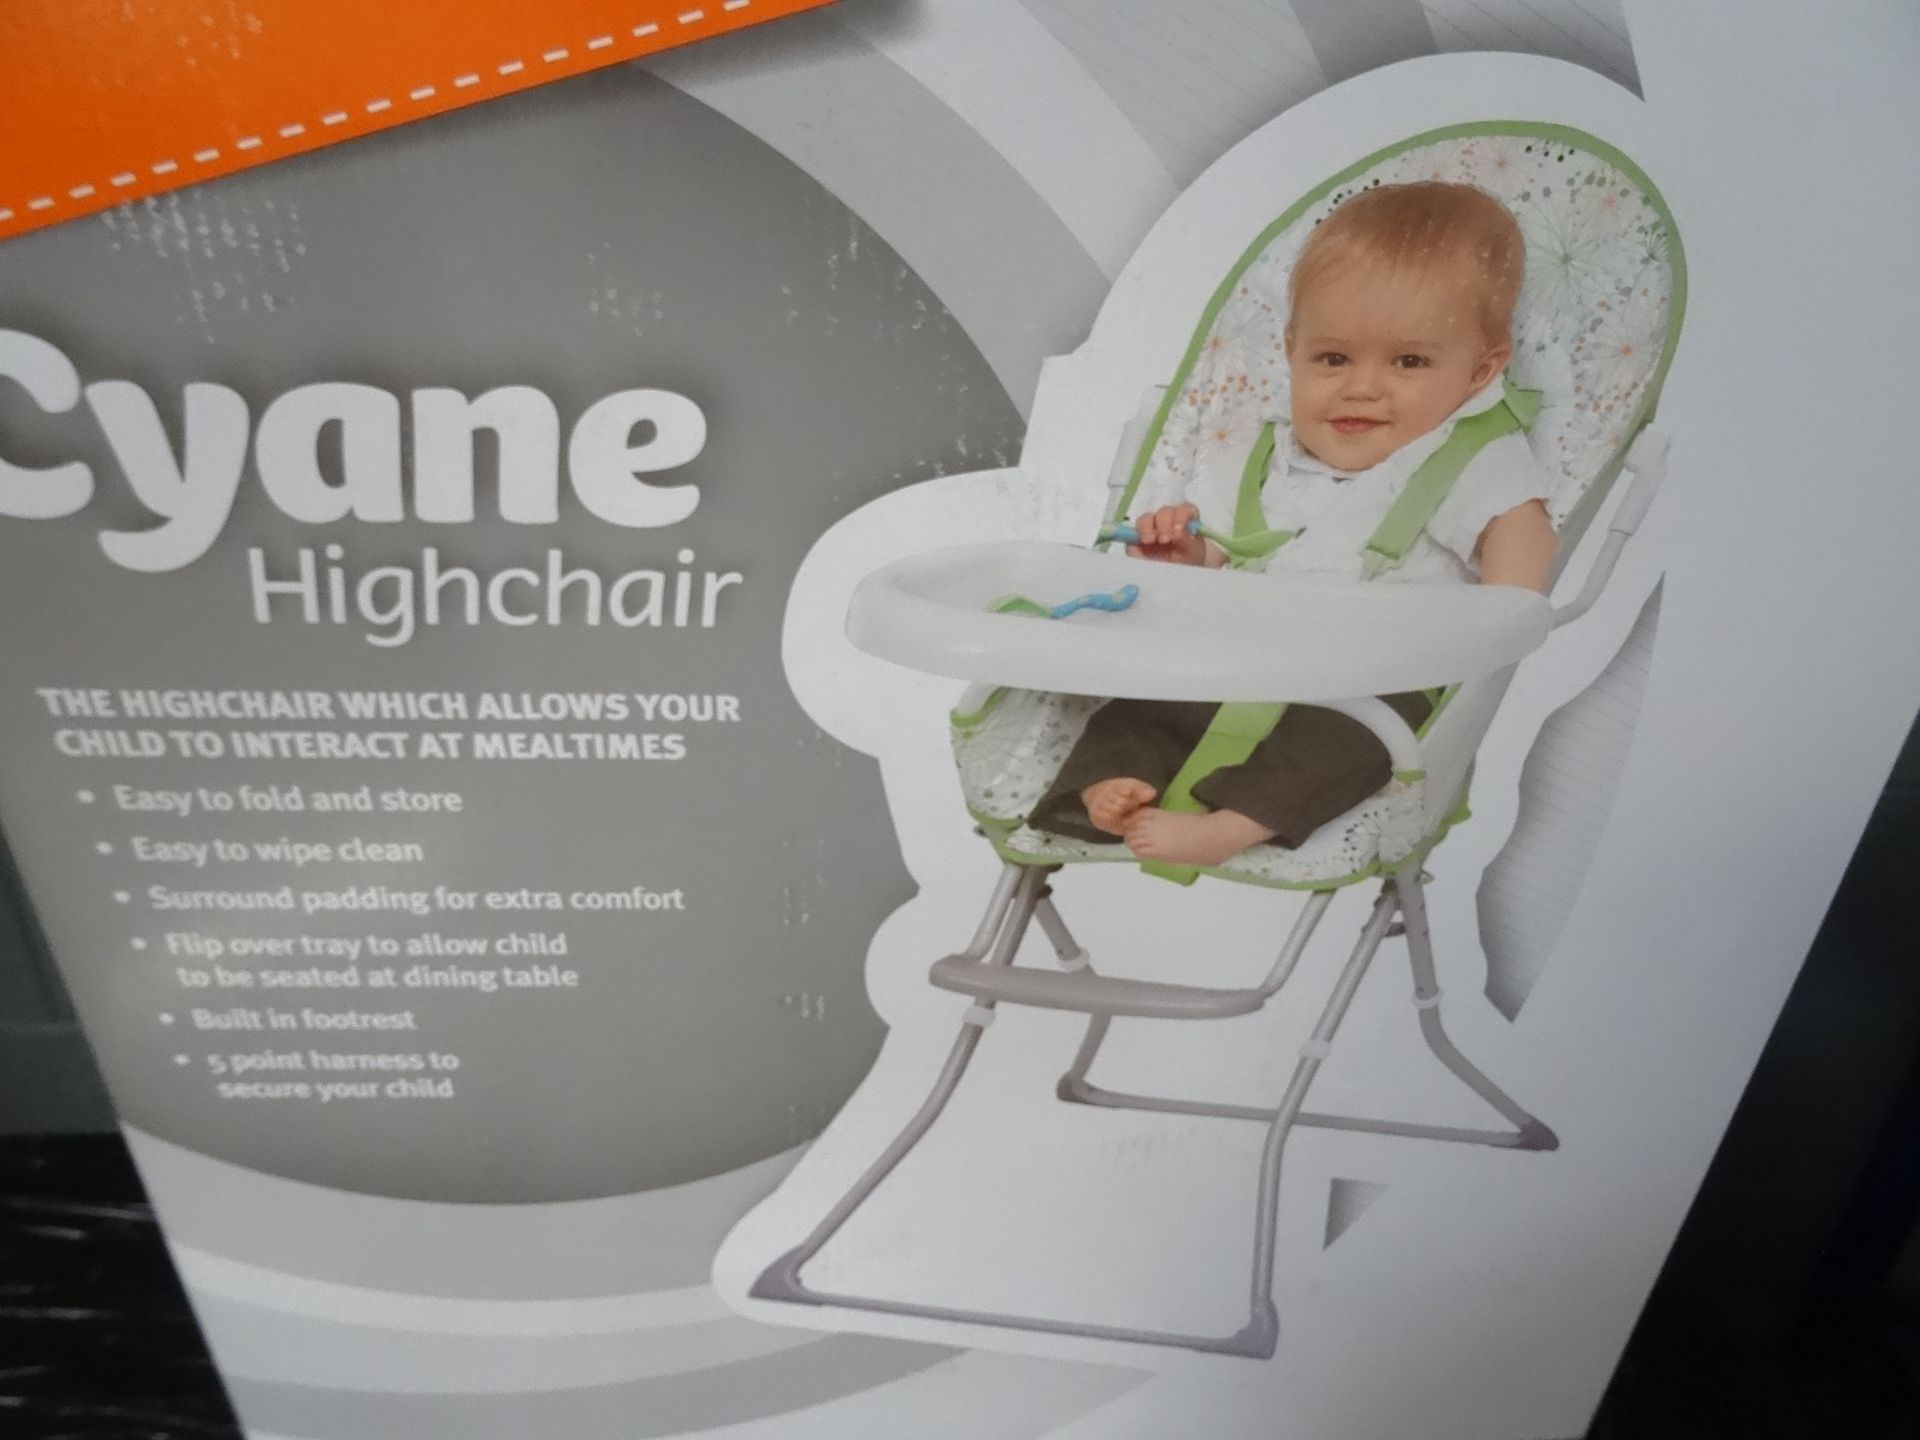 4 x Babyway Cyane High Chair. The highchair which allows your child to interact at mealtimes. Easy - Image 2 of 2